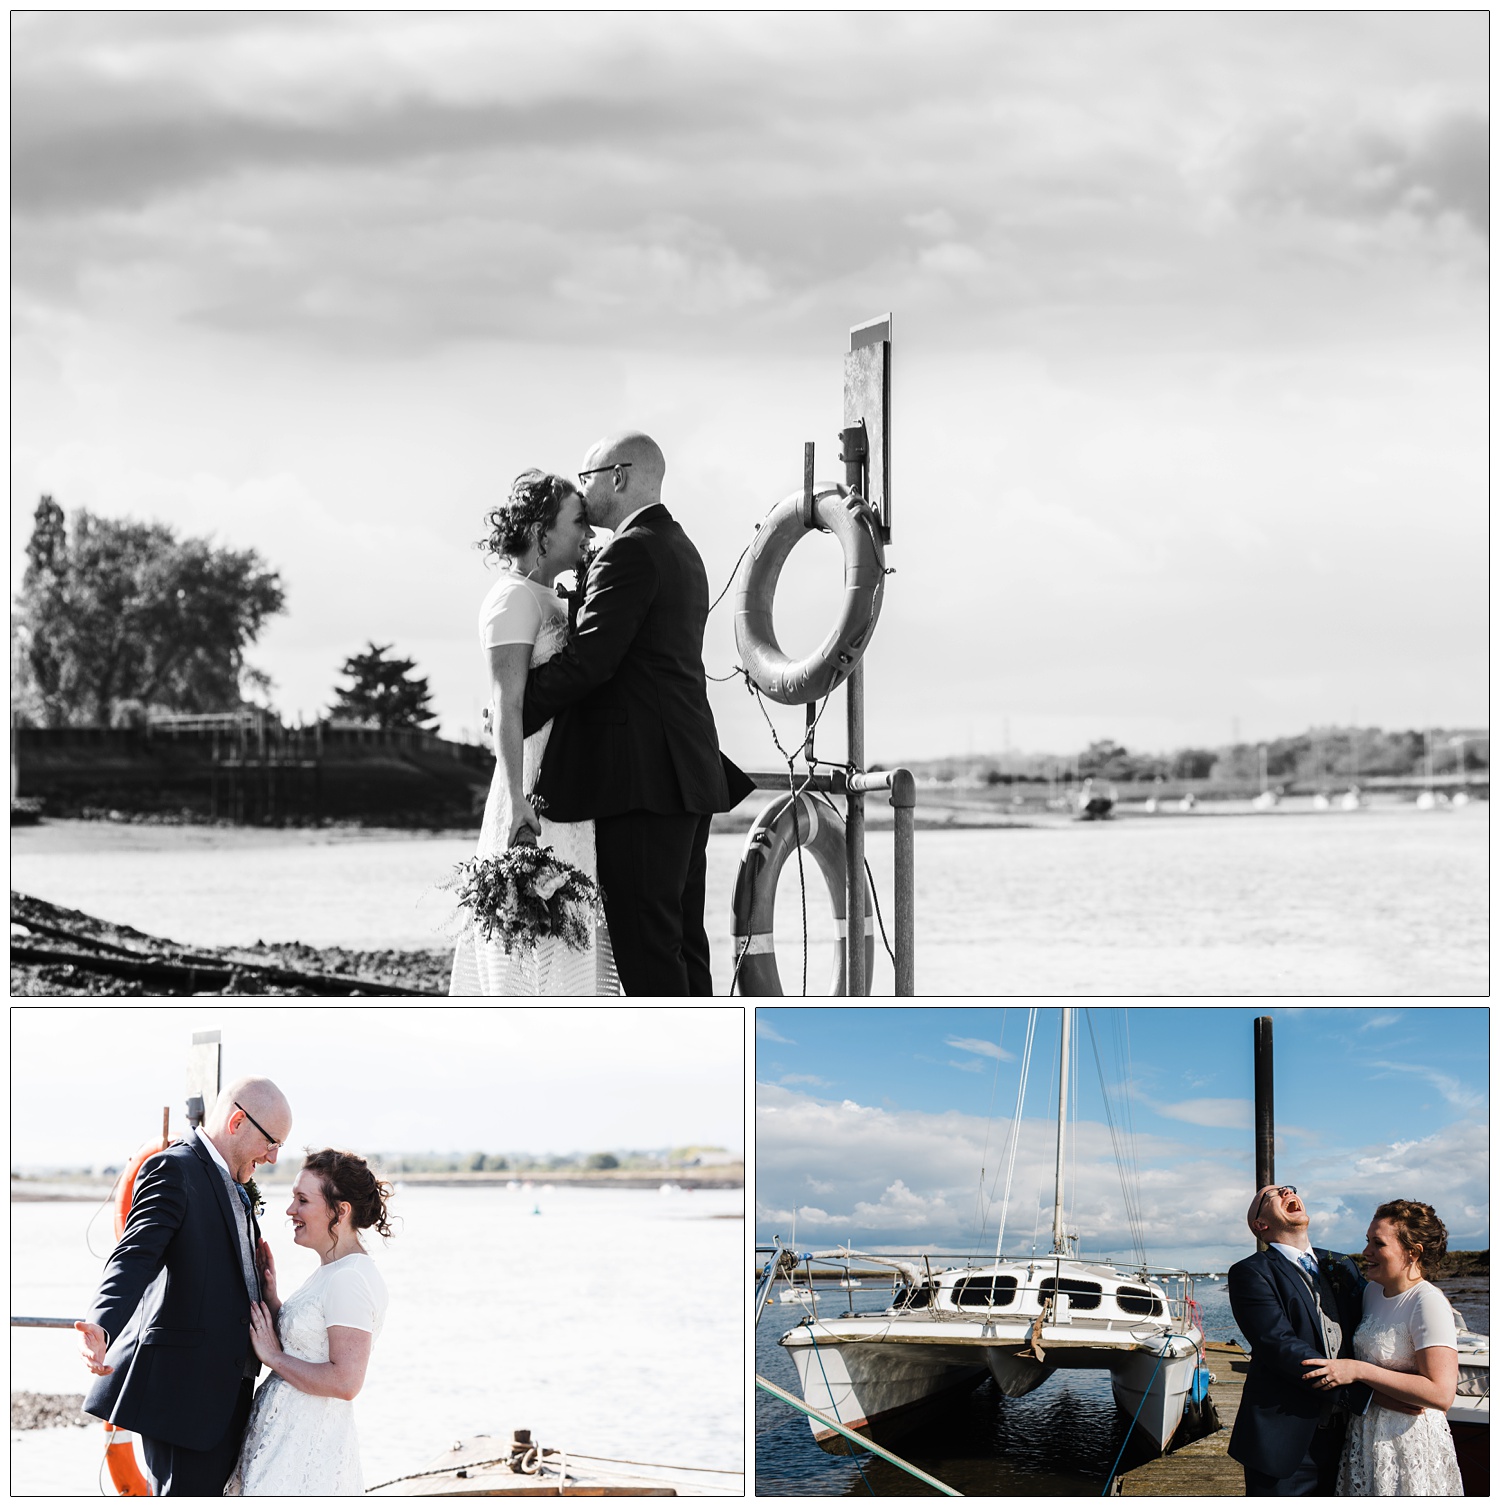 Some relaxed wedding portraits by the River Crouch.